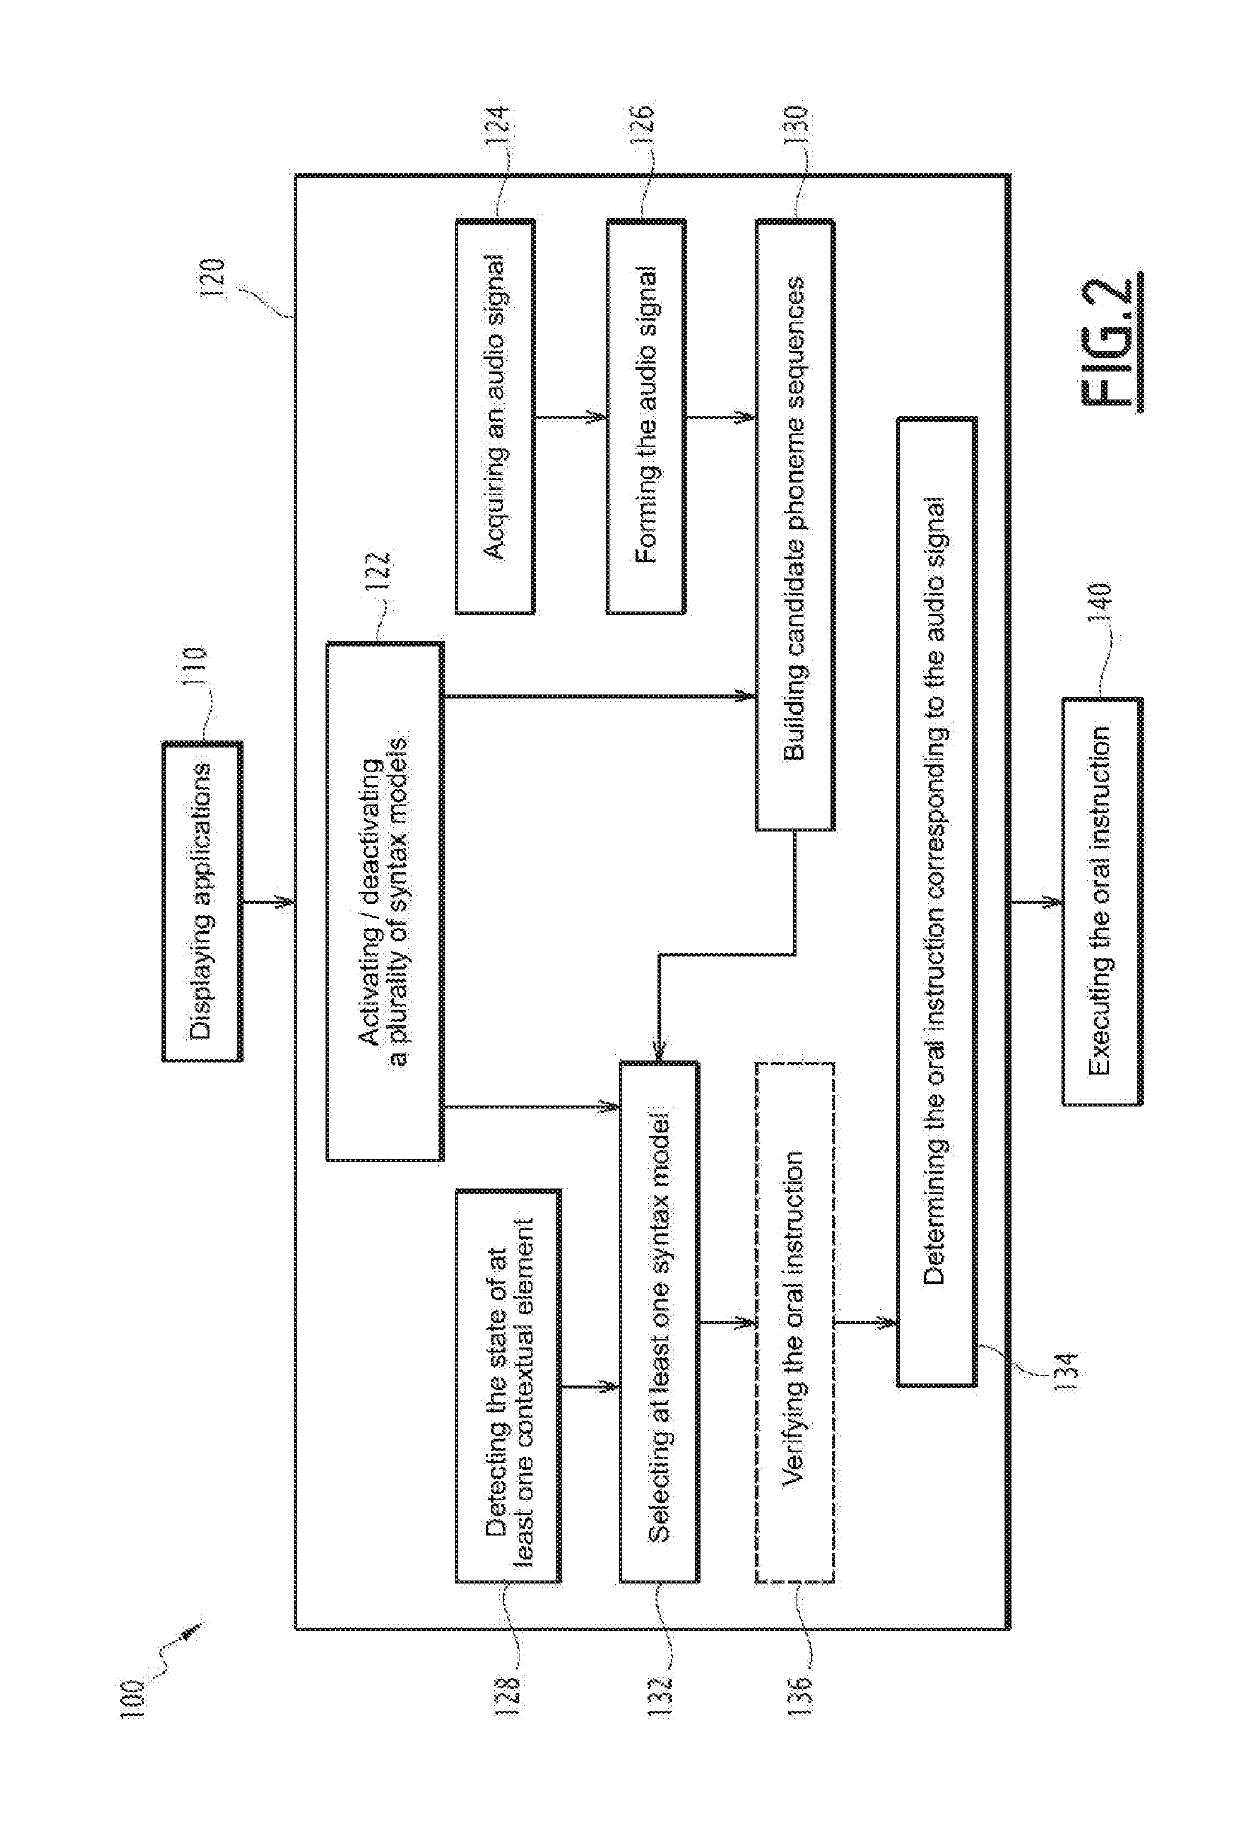 Automatic speech recognition with detection of at least one contextual element, and application management and maintenance of aircraft